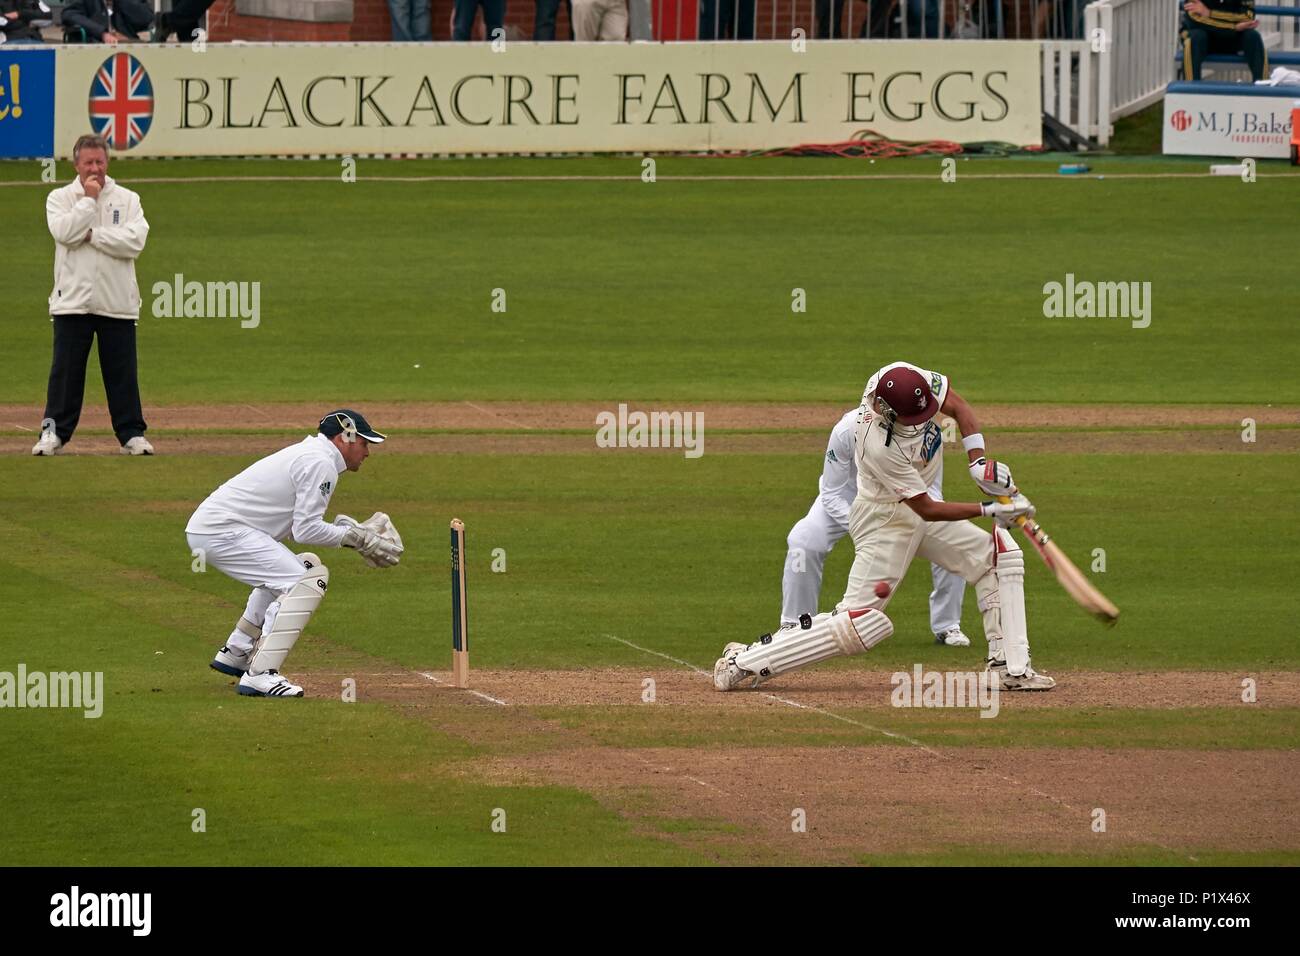 The ball which ended the career of Proteas 'keeper Mark Boucher. Hussain misses & is about to be bowled. Somerset v South Africa, 9th July 2012 Stock Photo